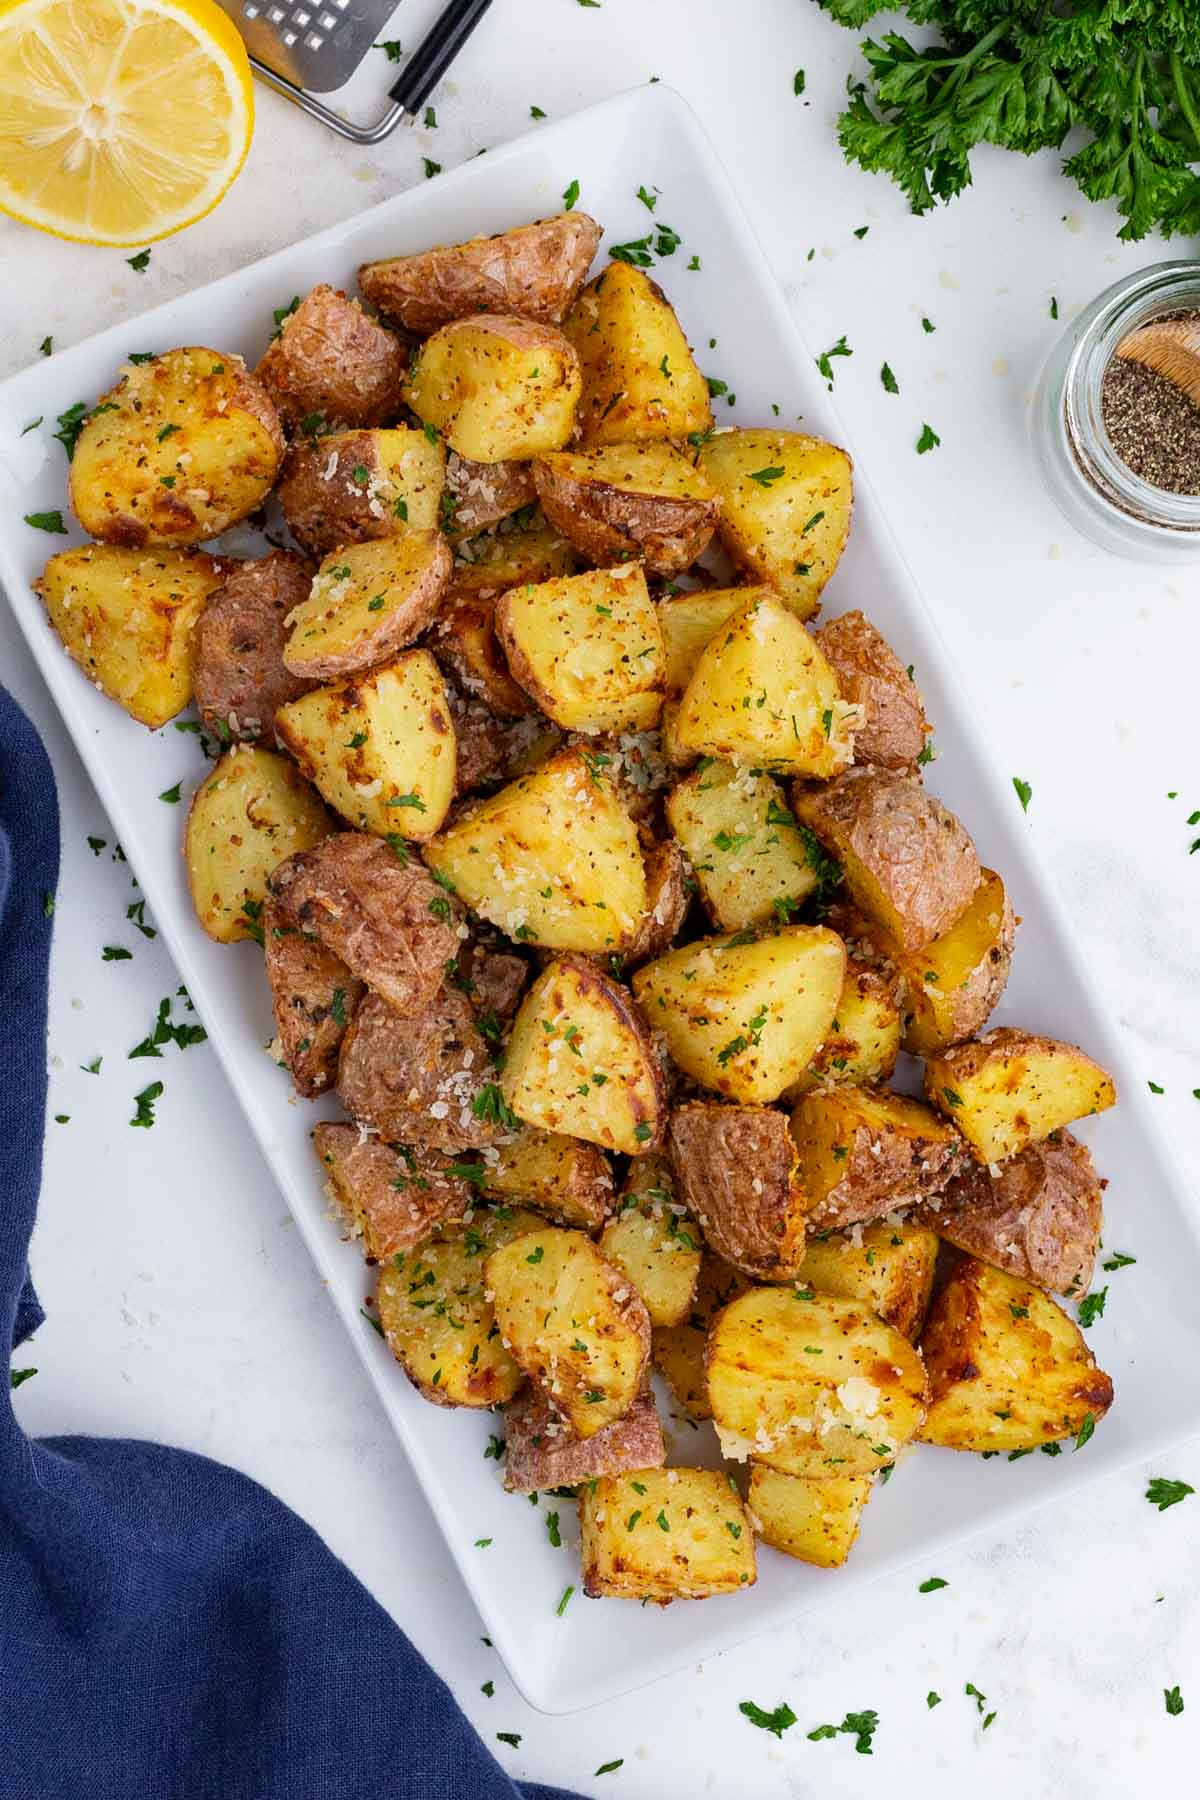 Serve up these air fryer roasted potatoes with your favorite main dish.